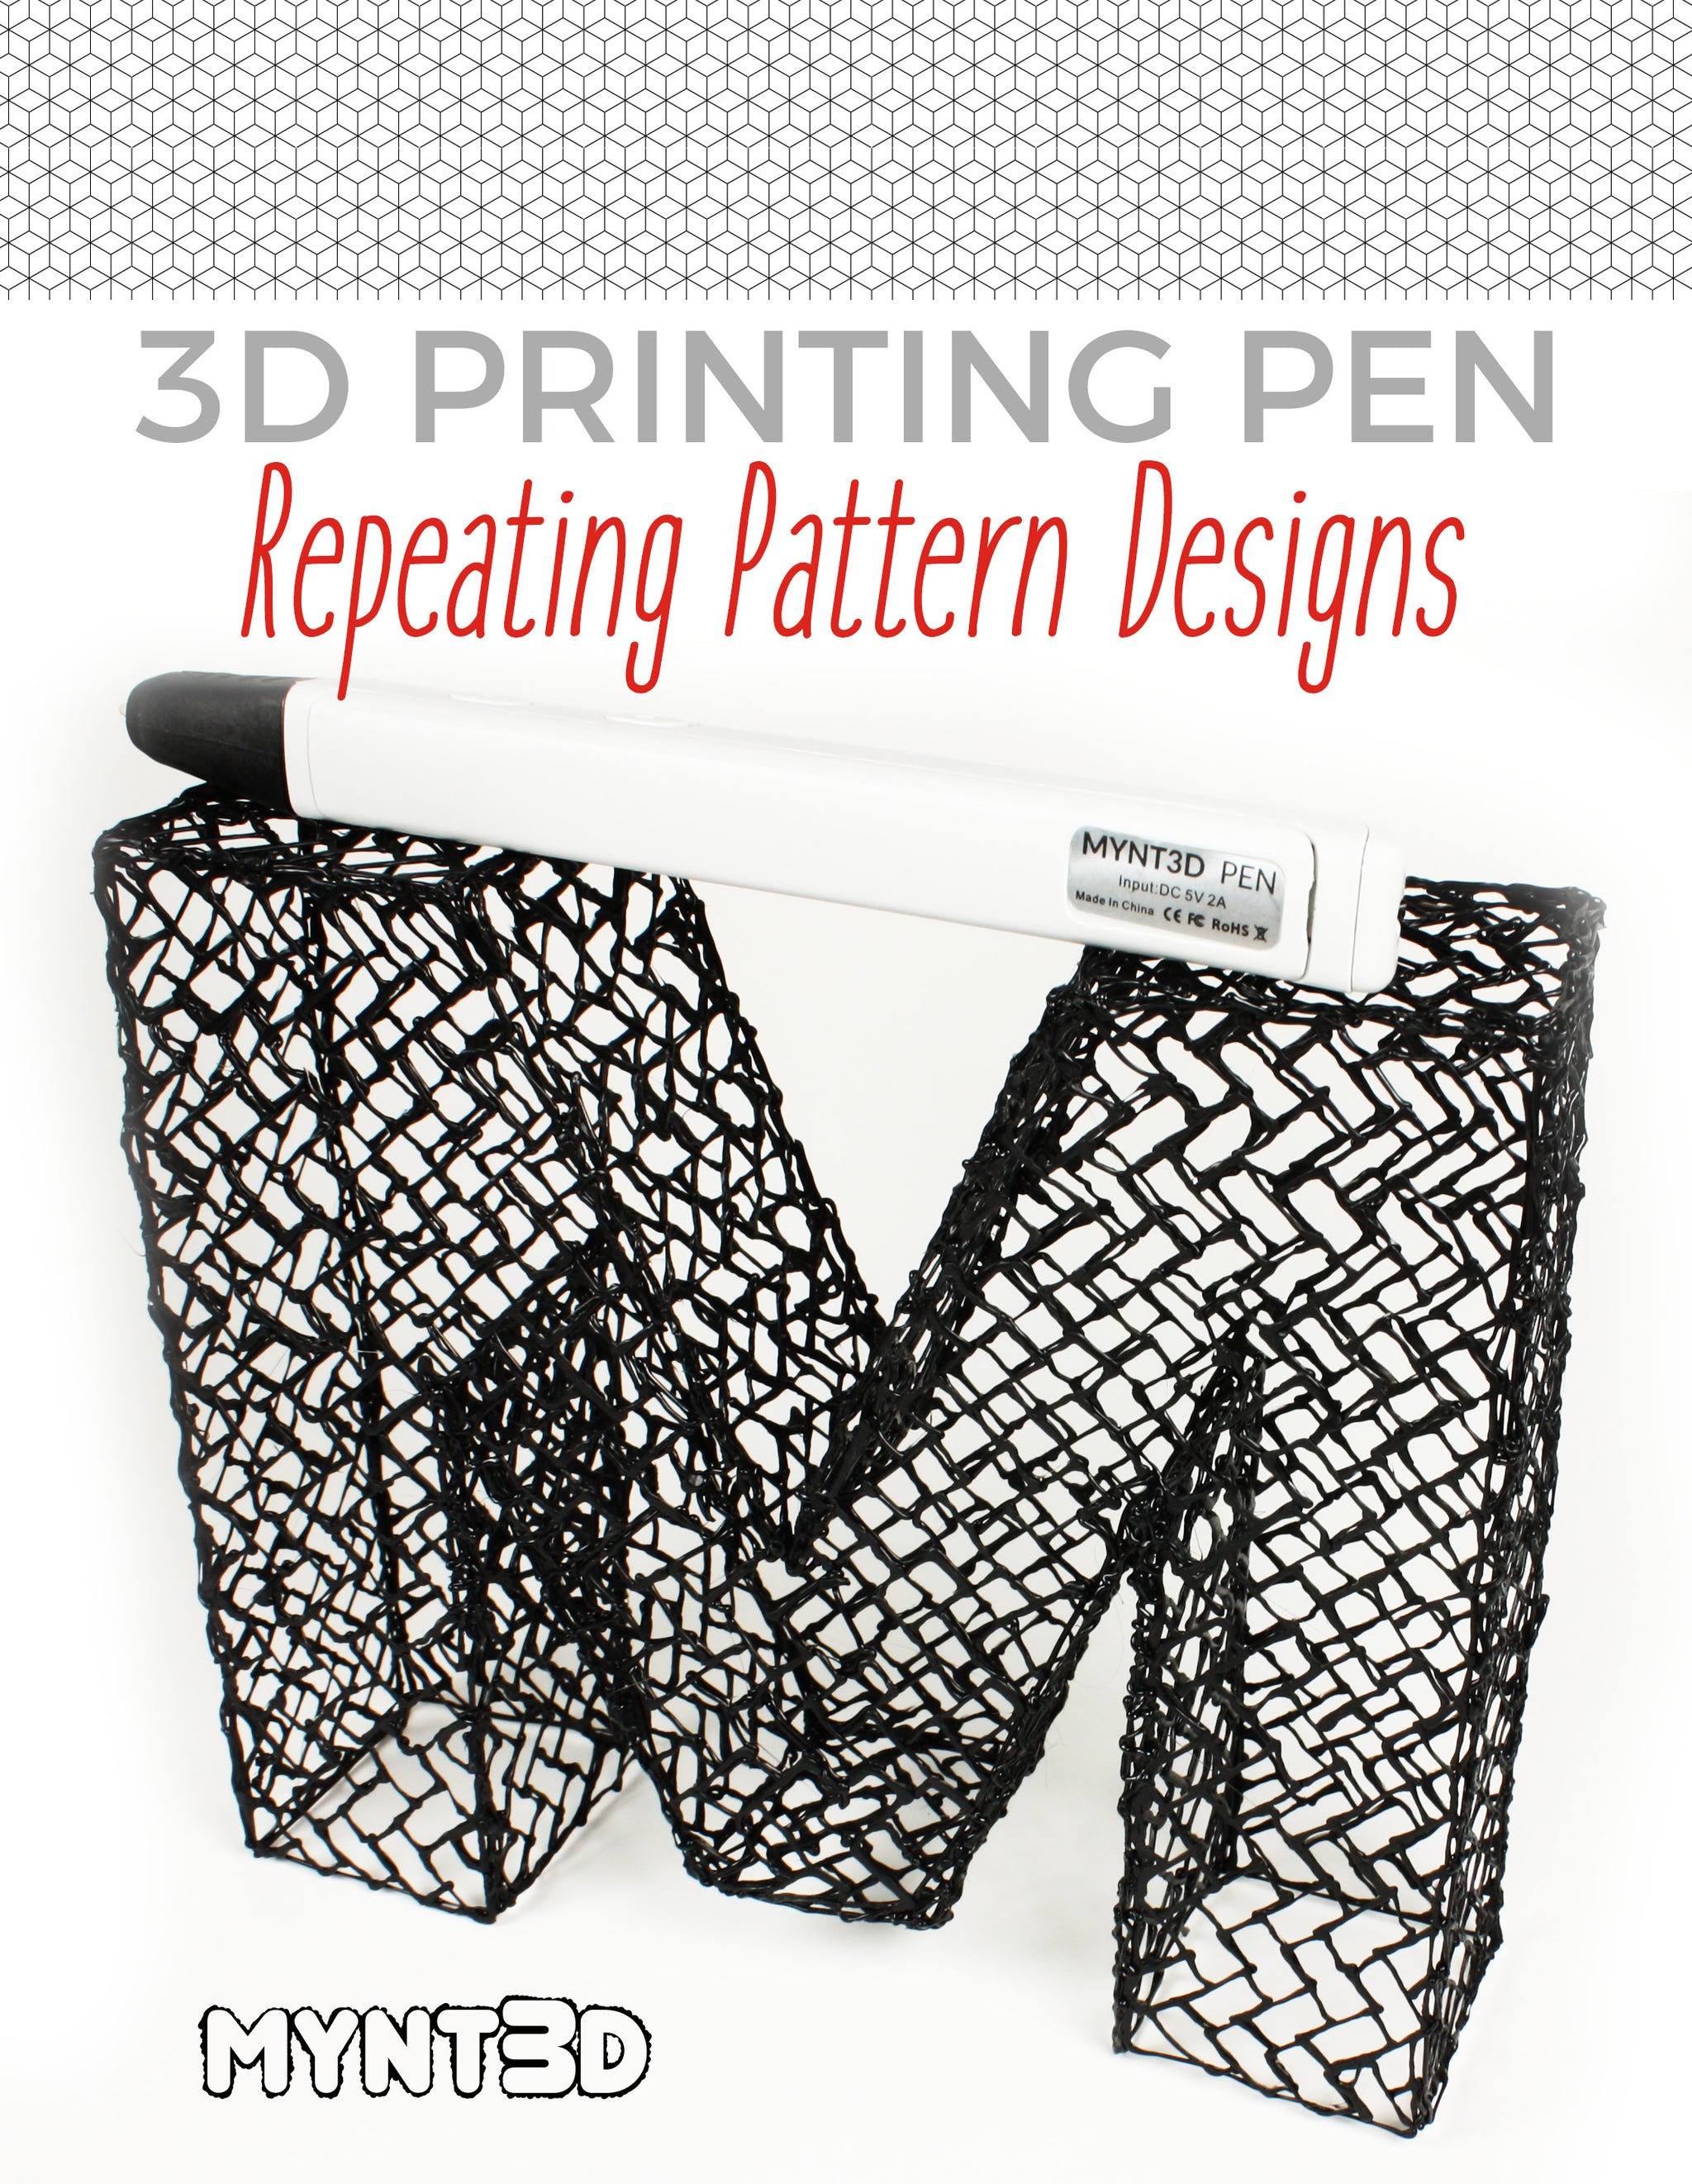 design-patterns-to-draw-in-3d-mynt3d